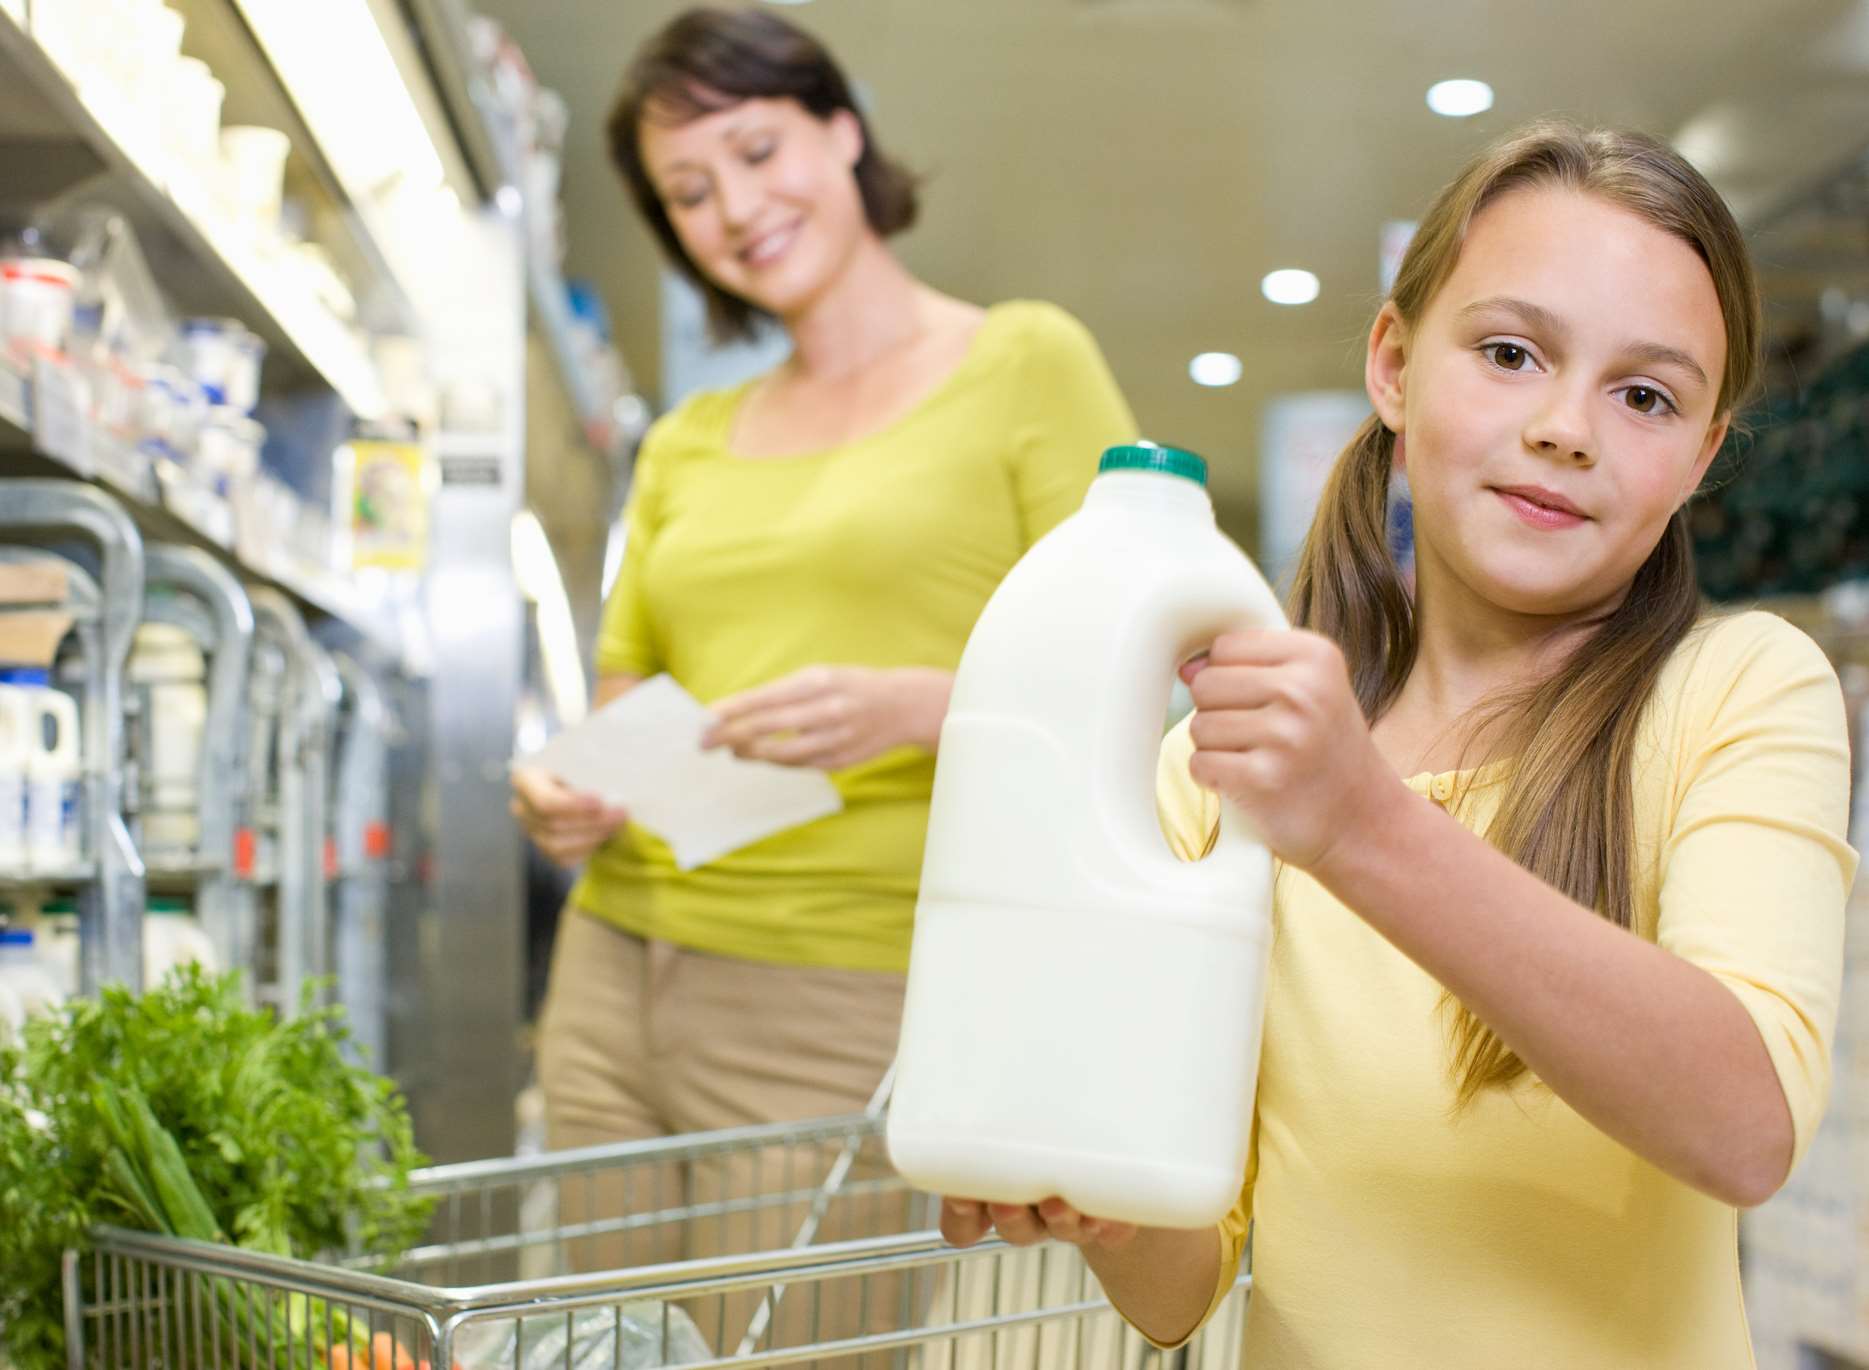 20% of kids think that milk comes straight from the fridge or supermarket